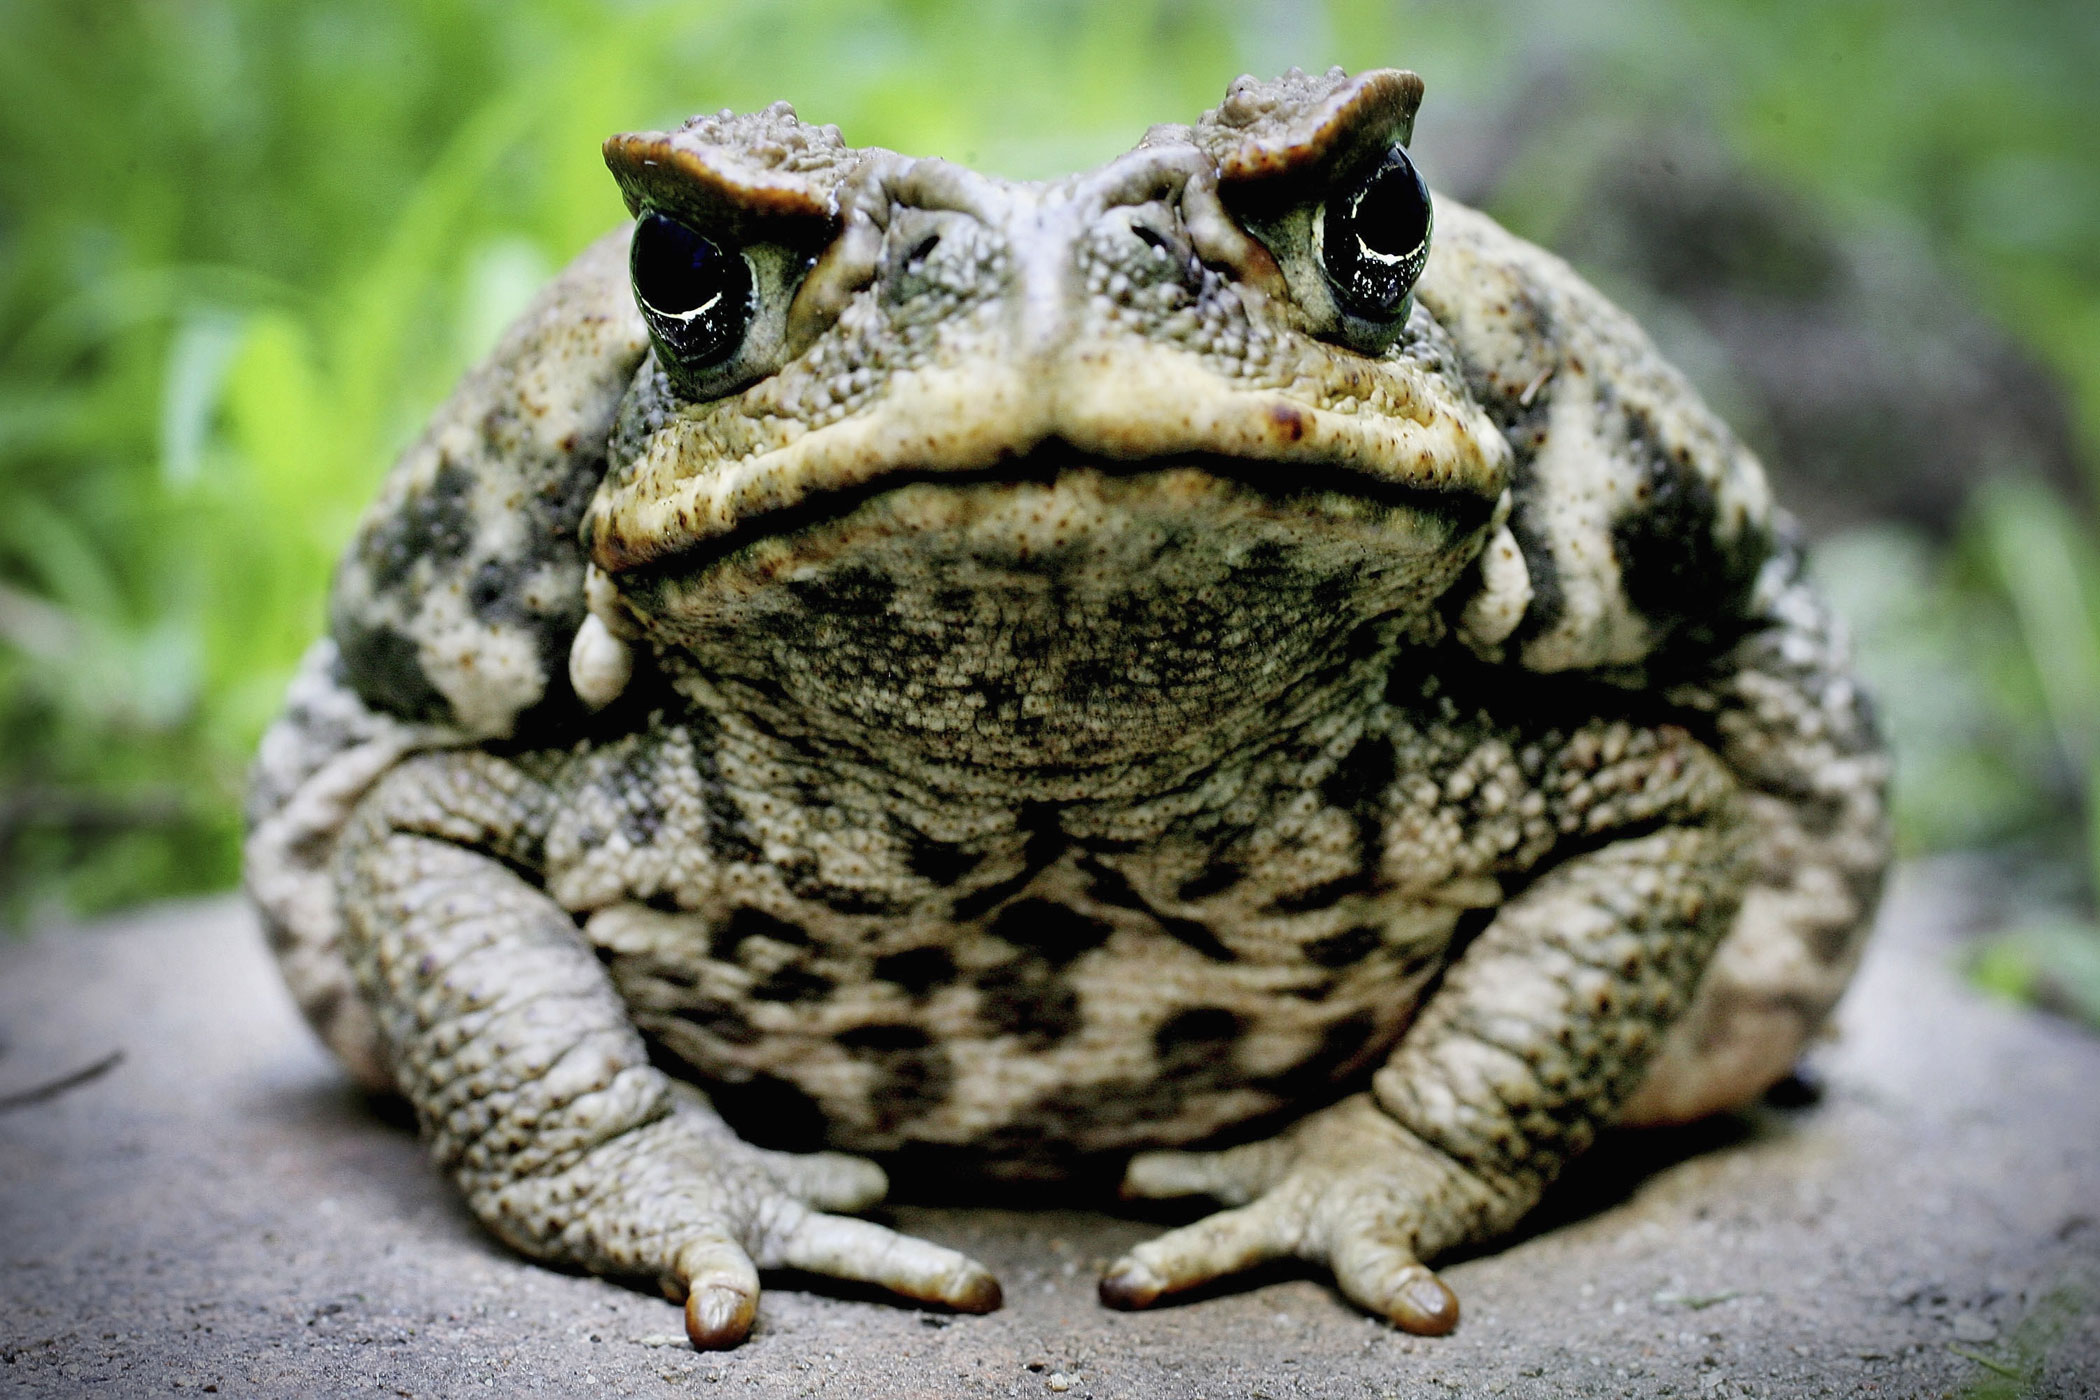 Originally introduced to control pests, the cane toad has become a pest of its own. Native to Central America, the toads were brought to Australia in 1935 in an attempt to control the cane beetle population in sugar plantations. Ultimately there was no evidence they killed a single beetle. Instead, the toads took over. Cane toads have few natural enemies outside of Central America, and when other animals try to eat them, sacs that run down their sides secrete a poison that kills predators in minutes.